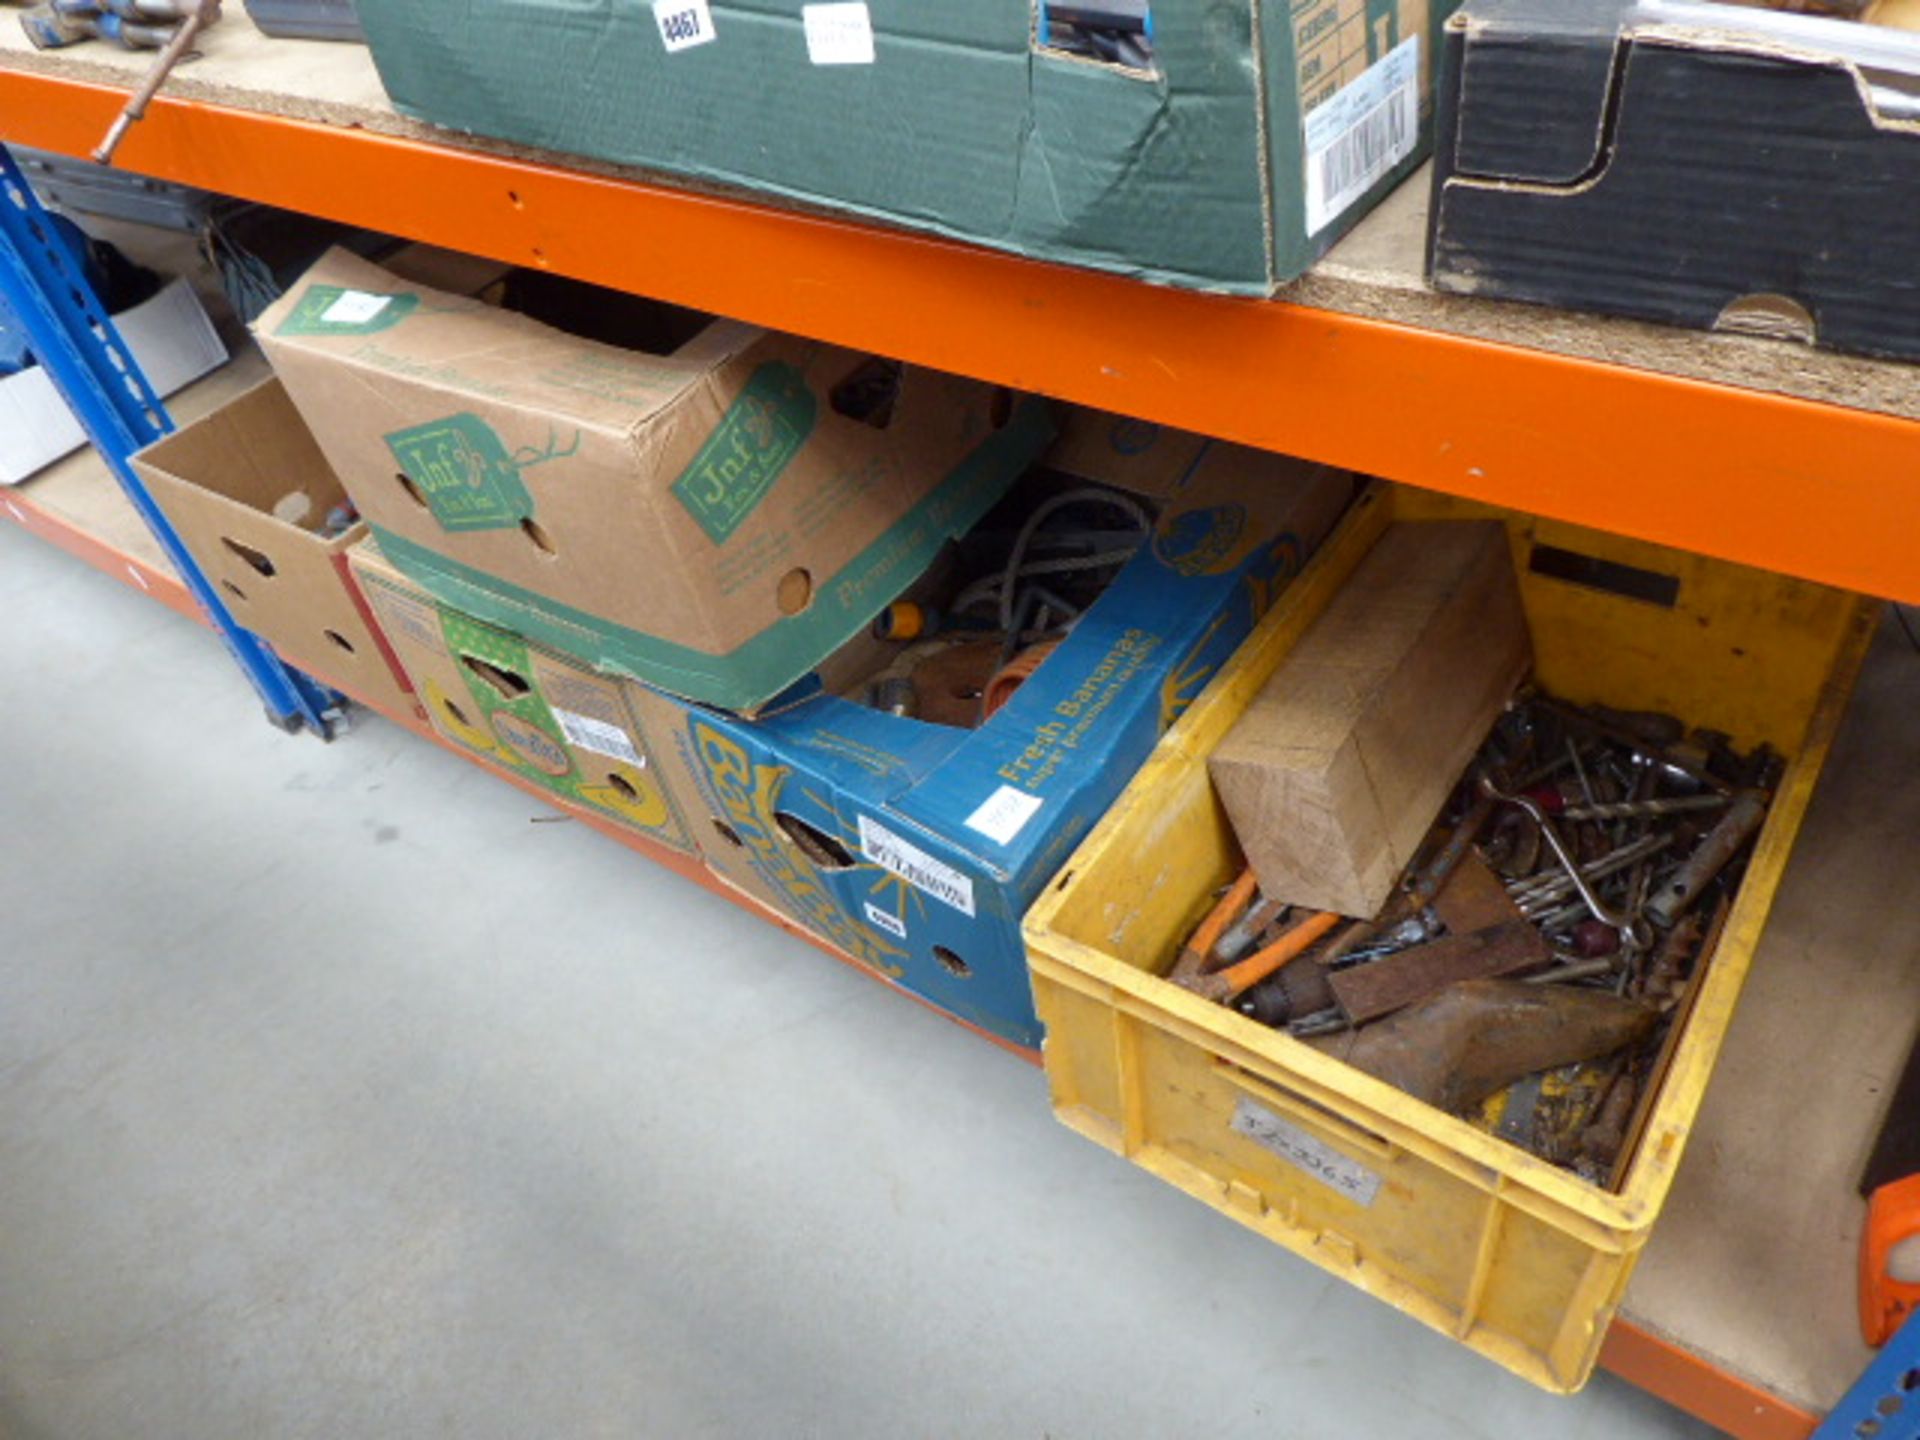 Six boxes of garage items including grease guns, screwdrivers, drills, cobblers lathes, nails etc